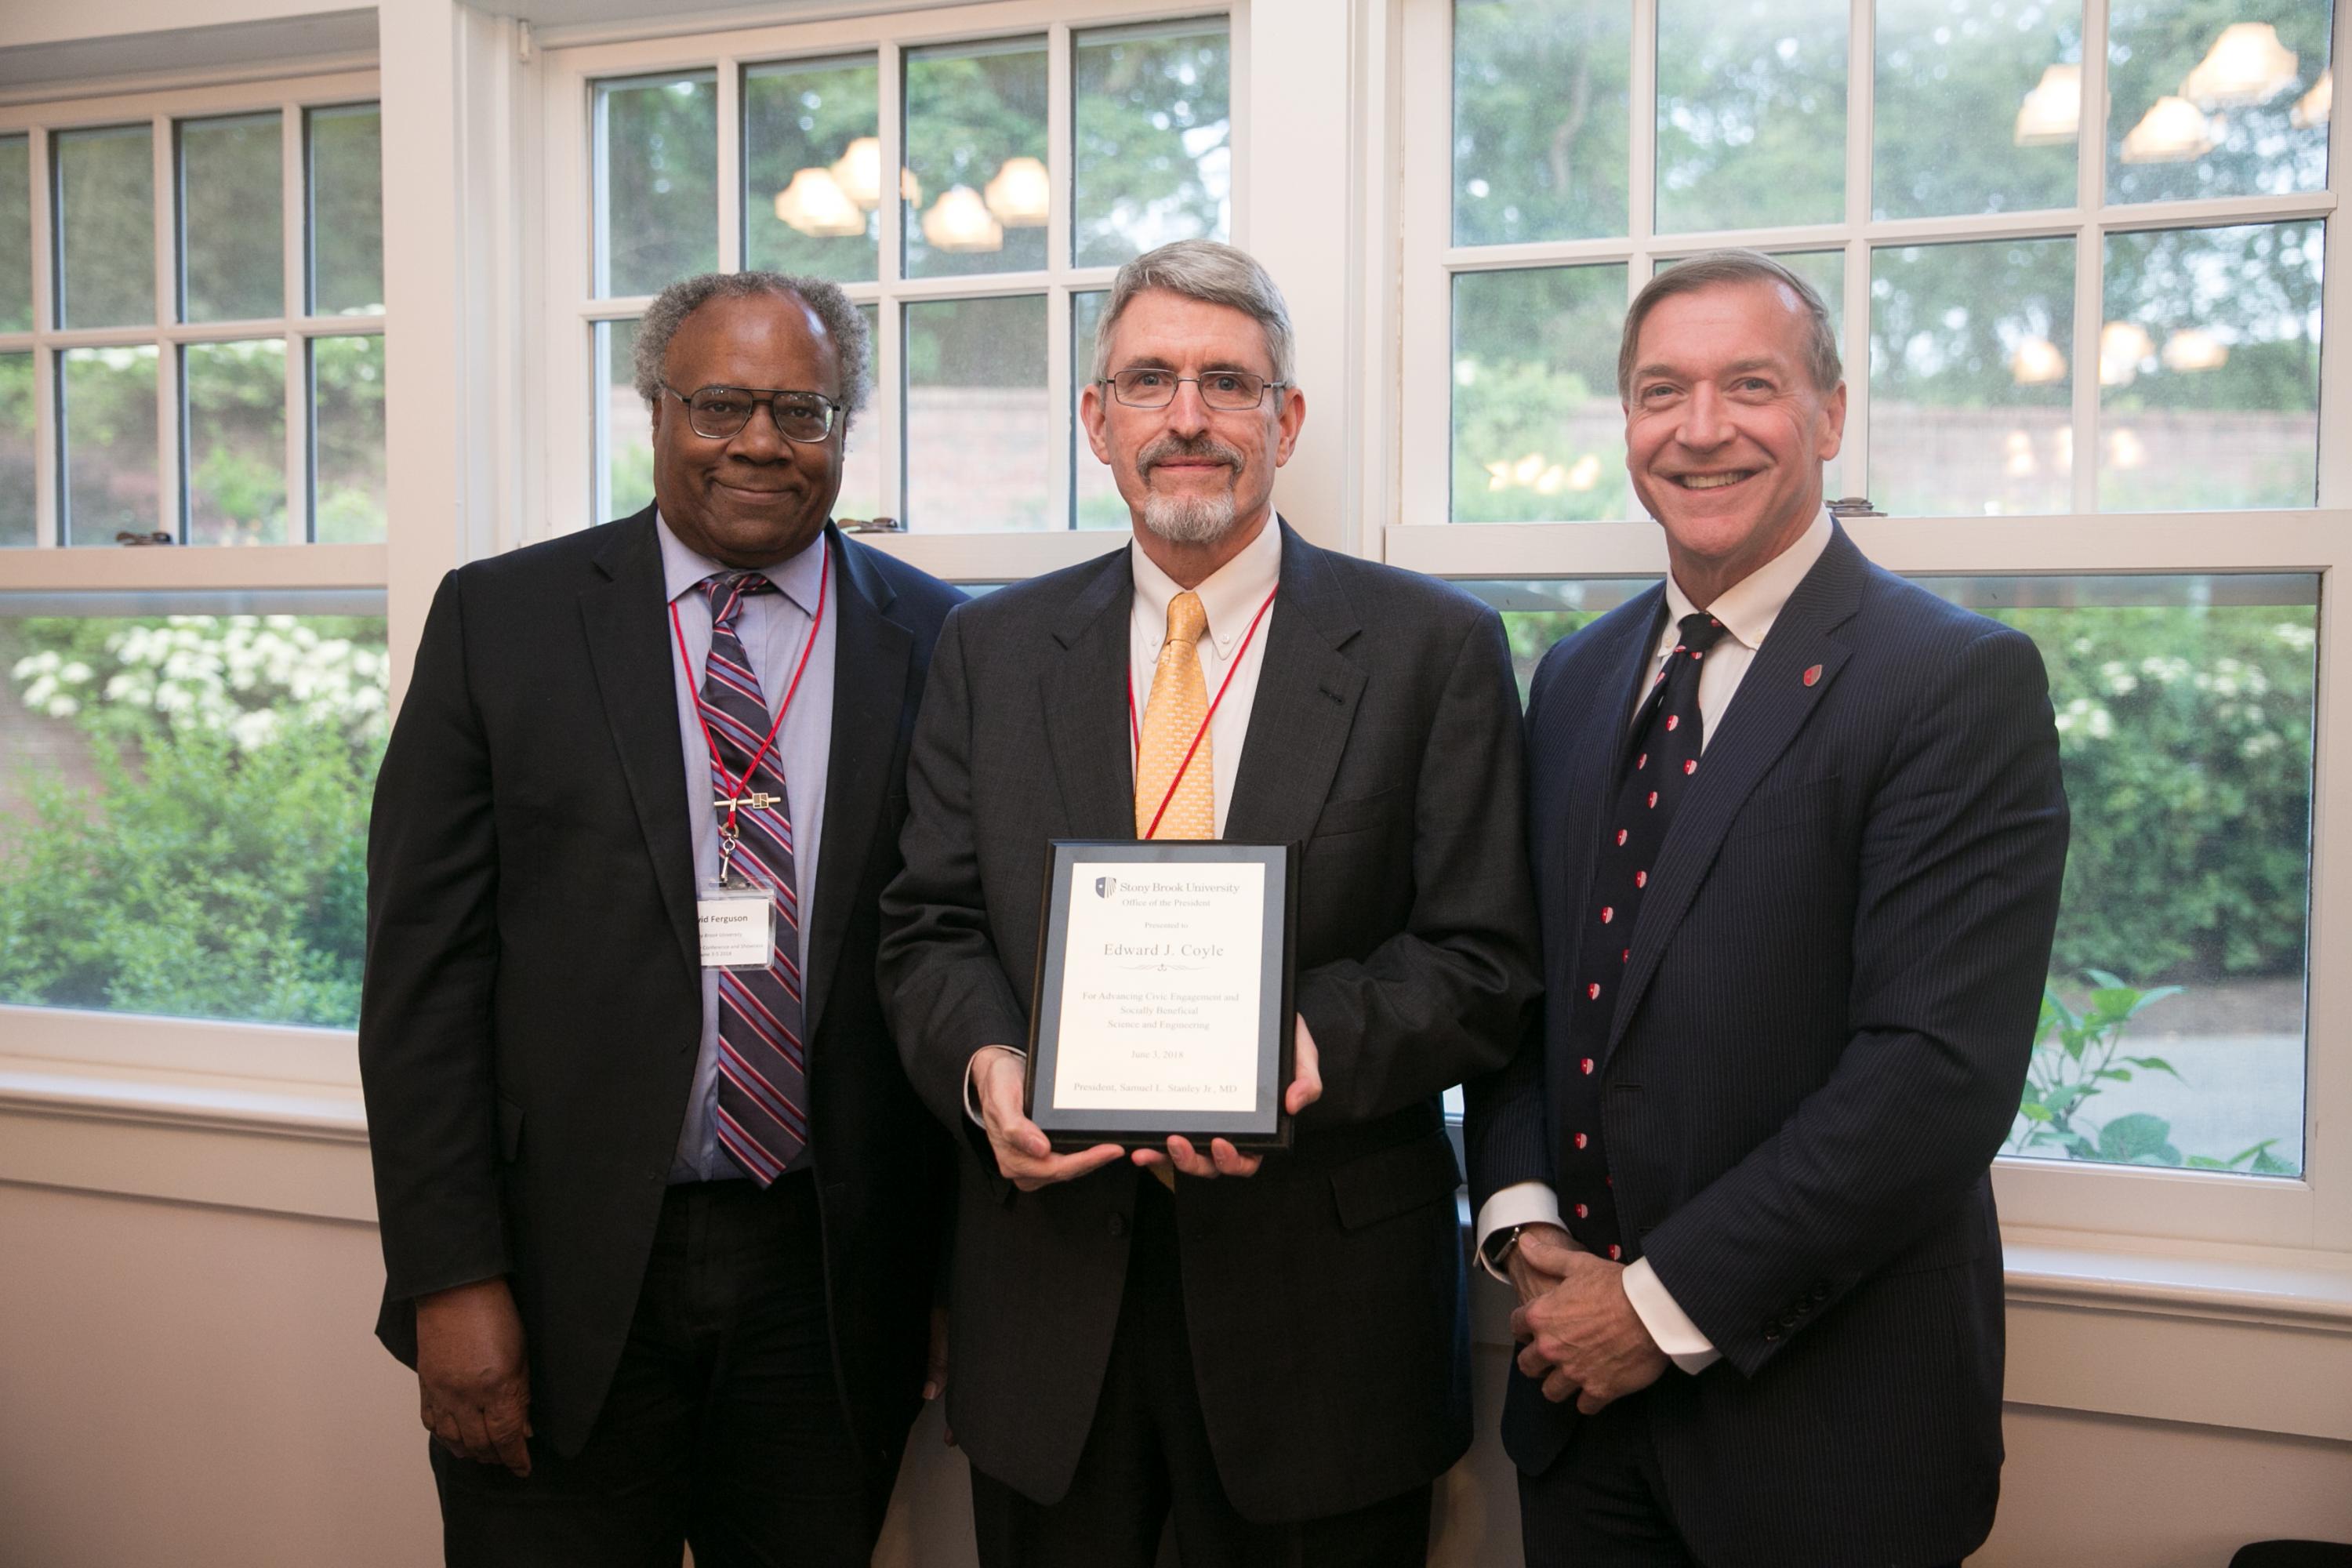 Edward J. Coyle presented with award at SUNY Industry Conference and Showcase